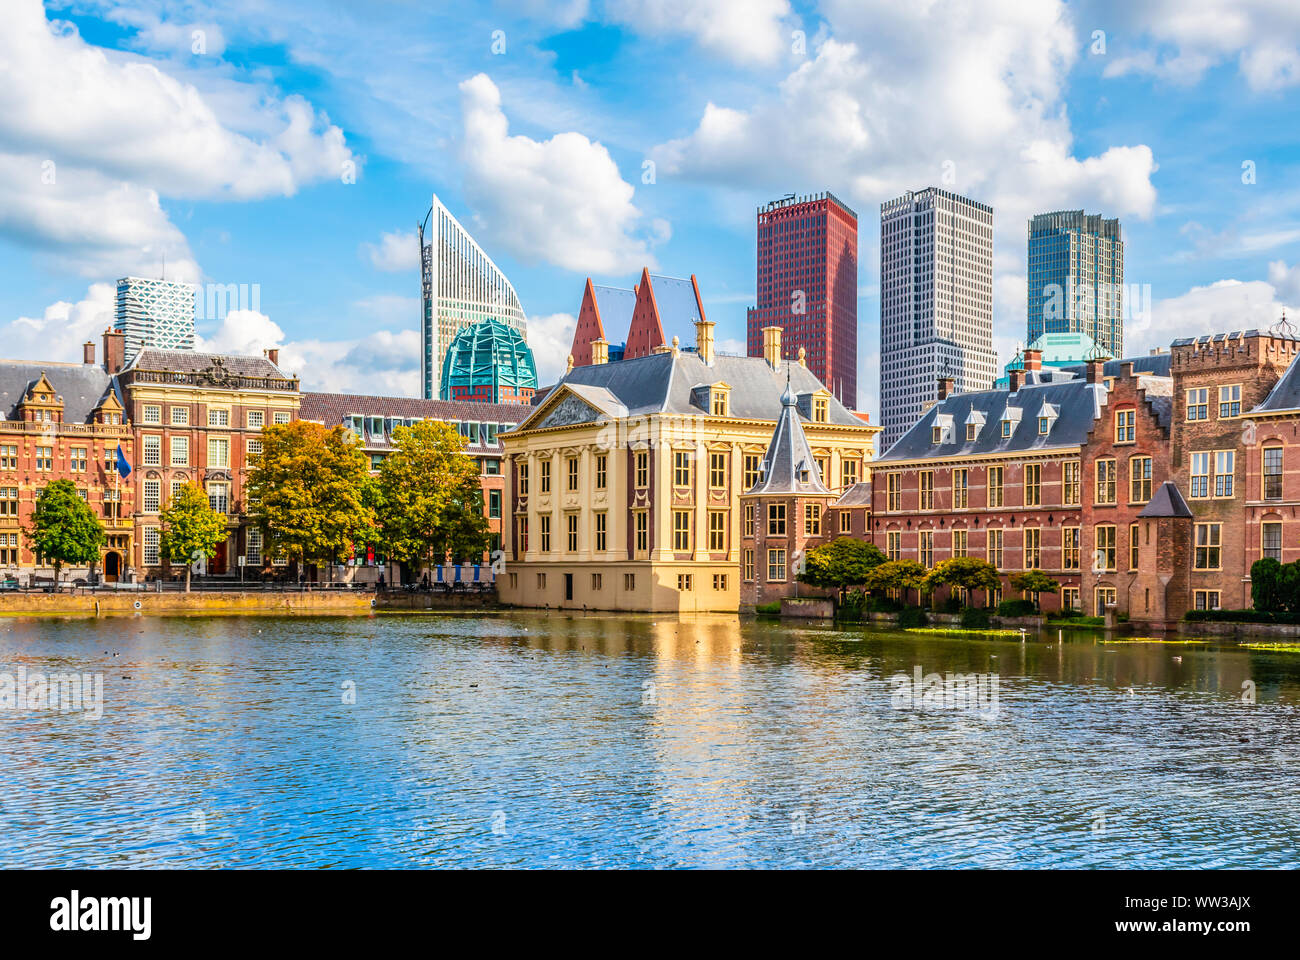 Skyline of the Hague, the Netherlands. Stock Photo